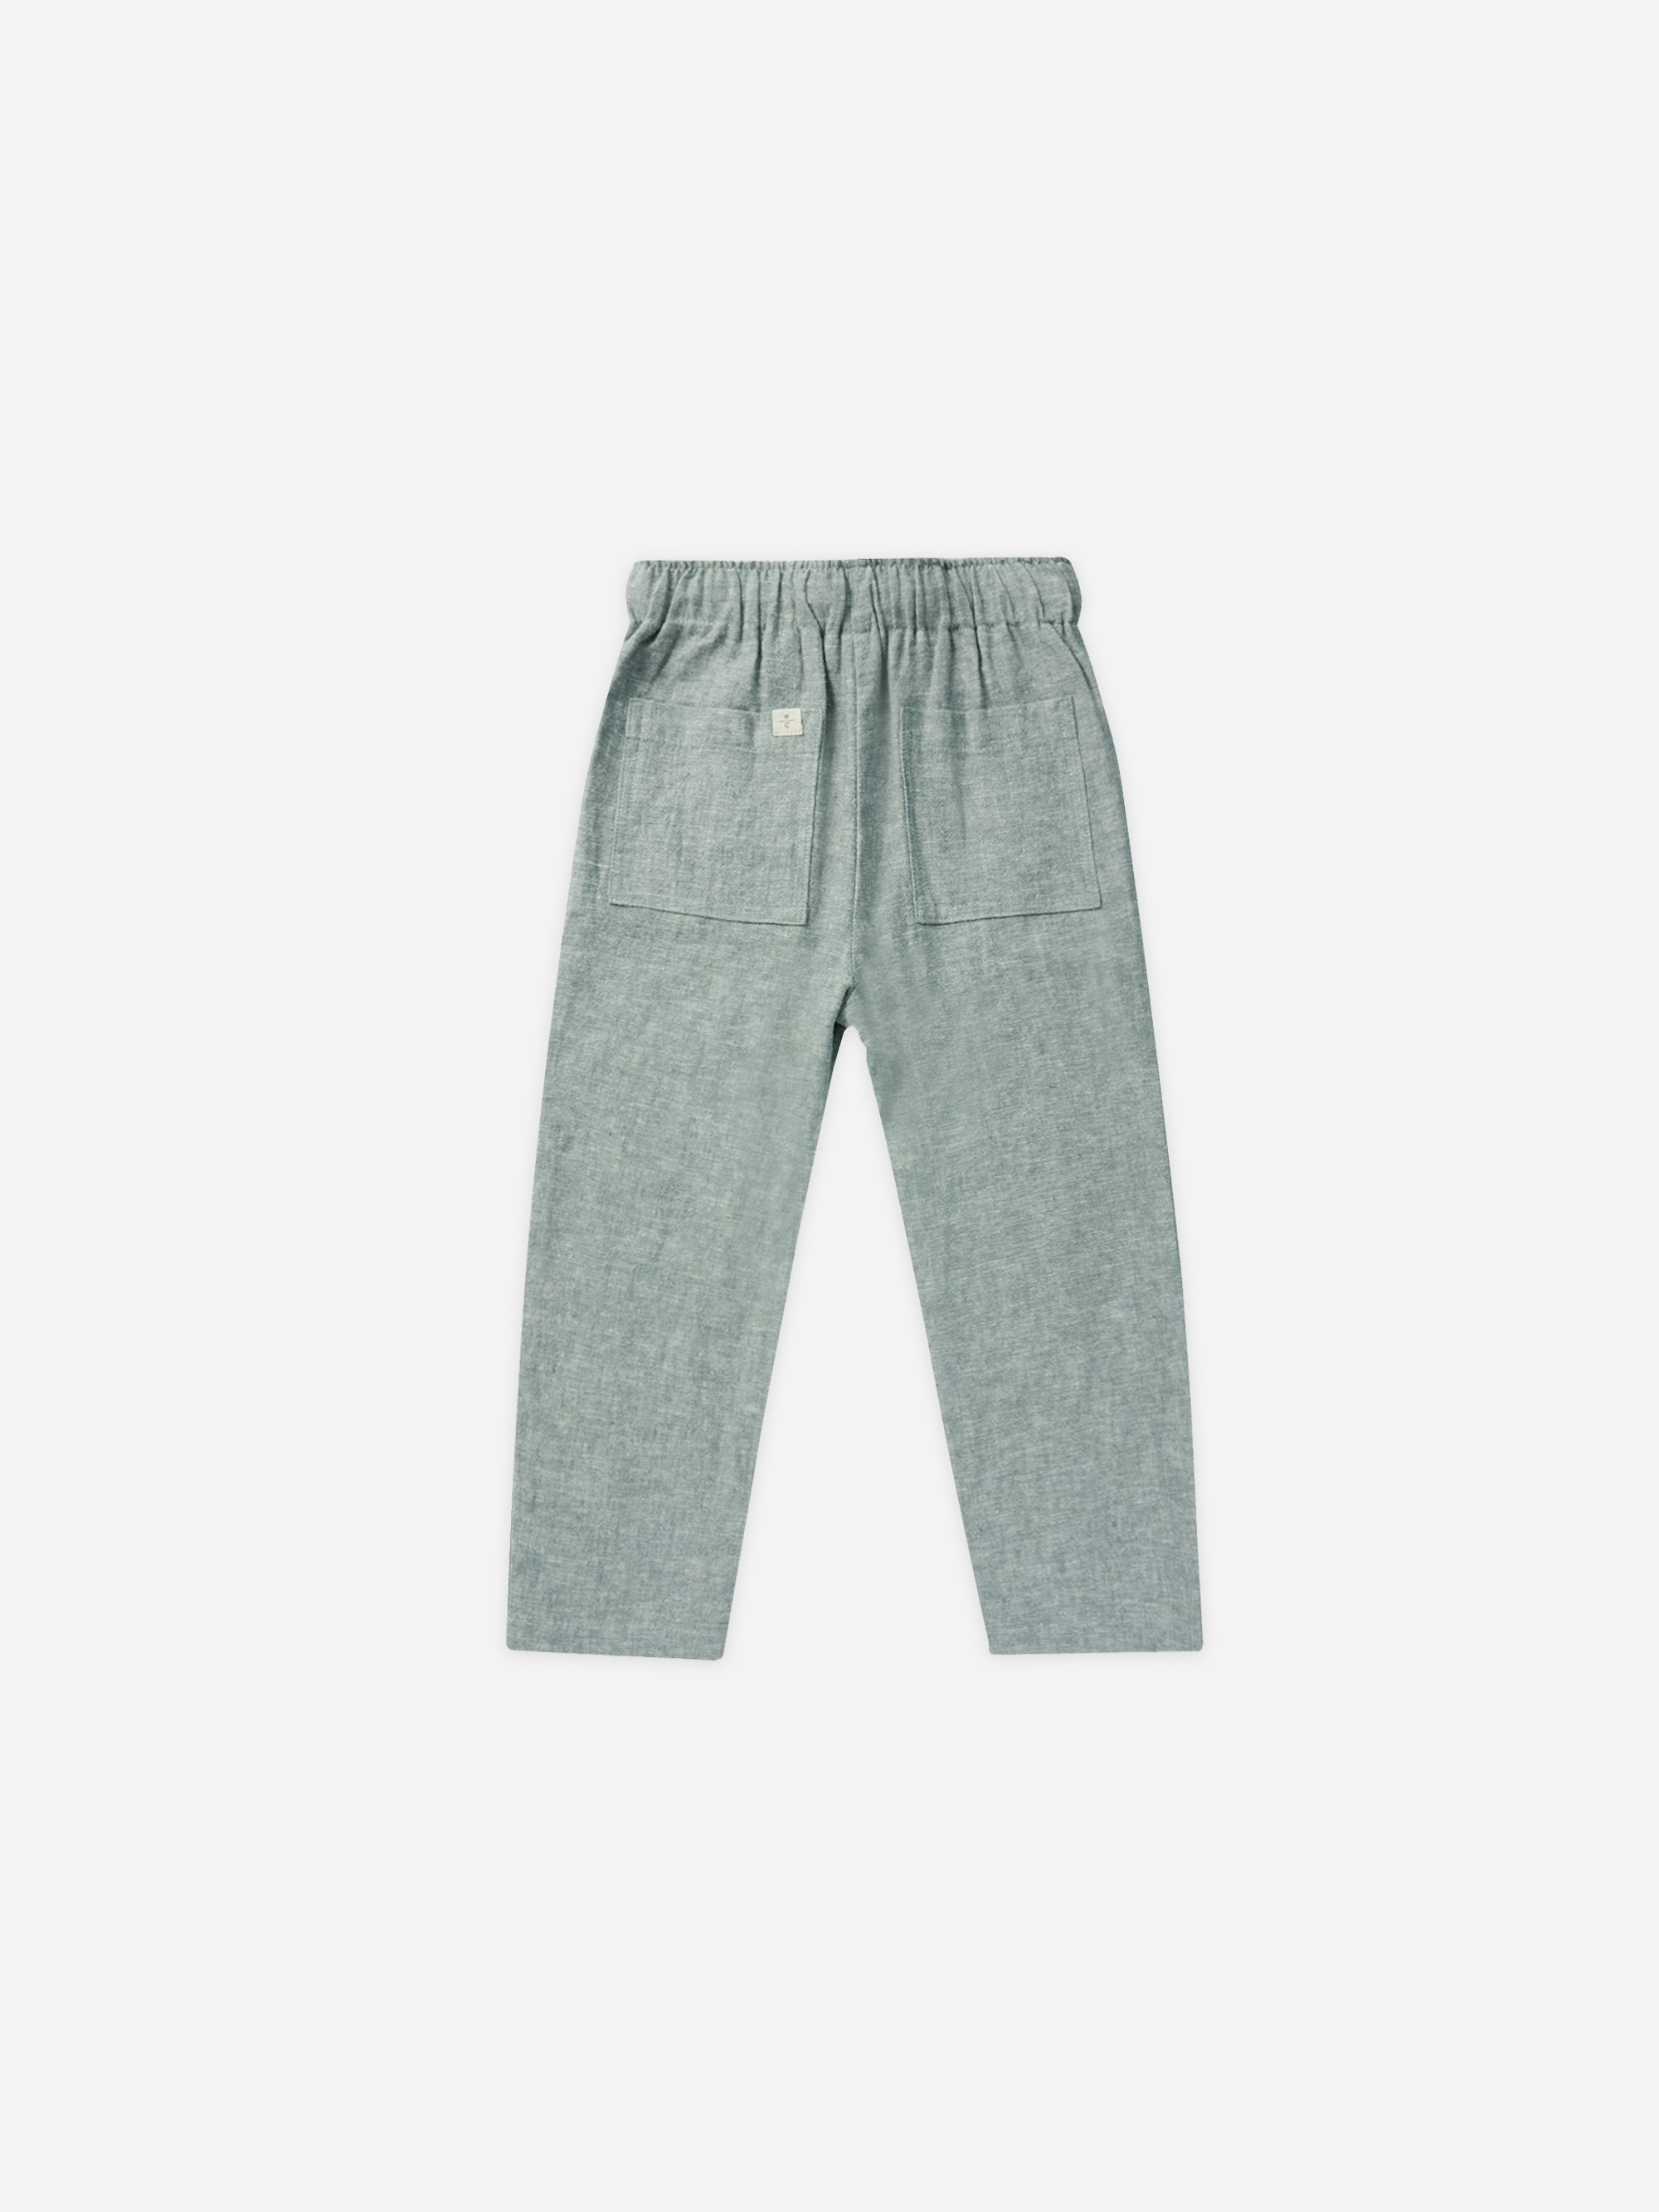 Kalen Pant || Heathered Indigo - Rylee + Cru | Kids Clothes | Trendy Baby Clothes | Modern Infant Outfits |